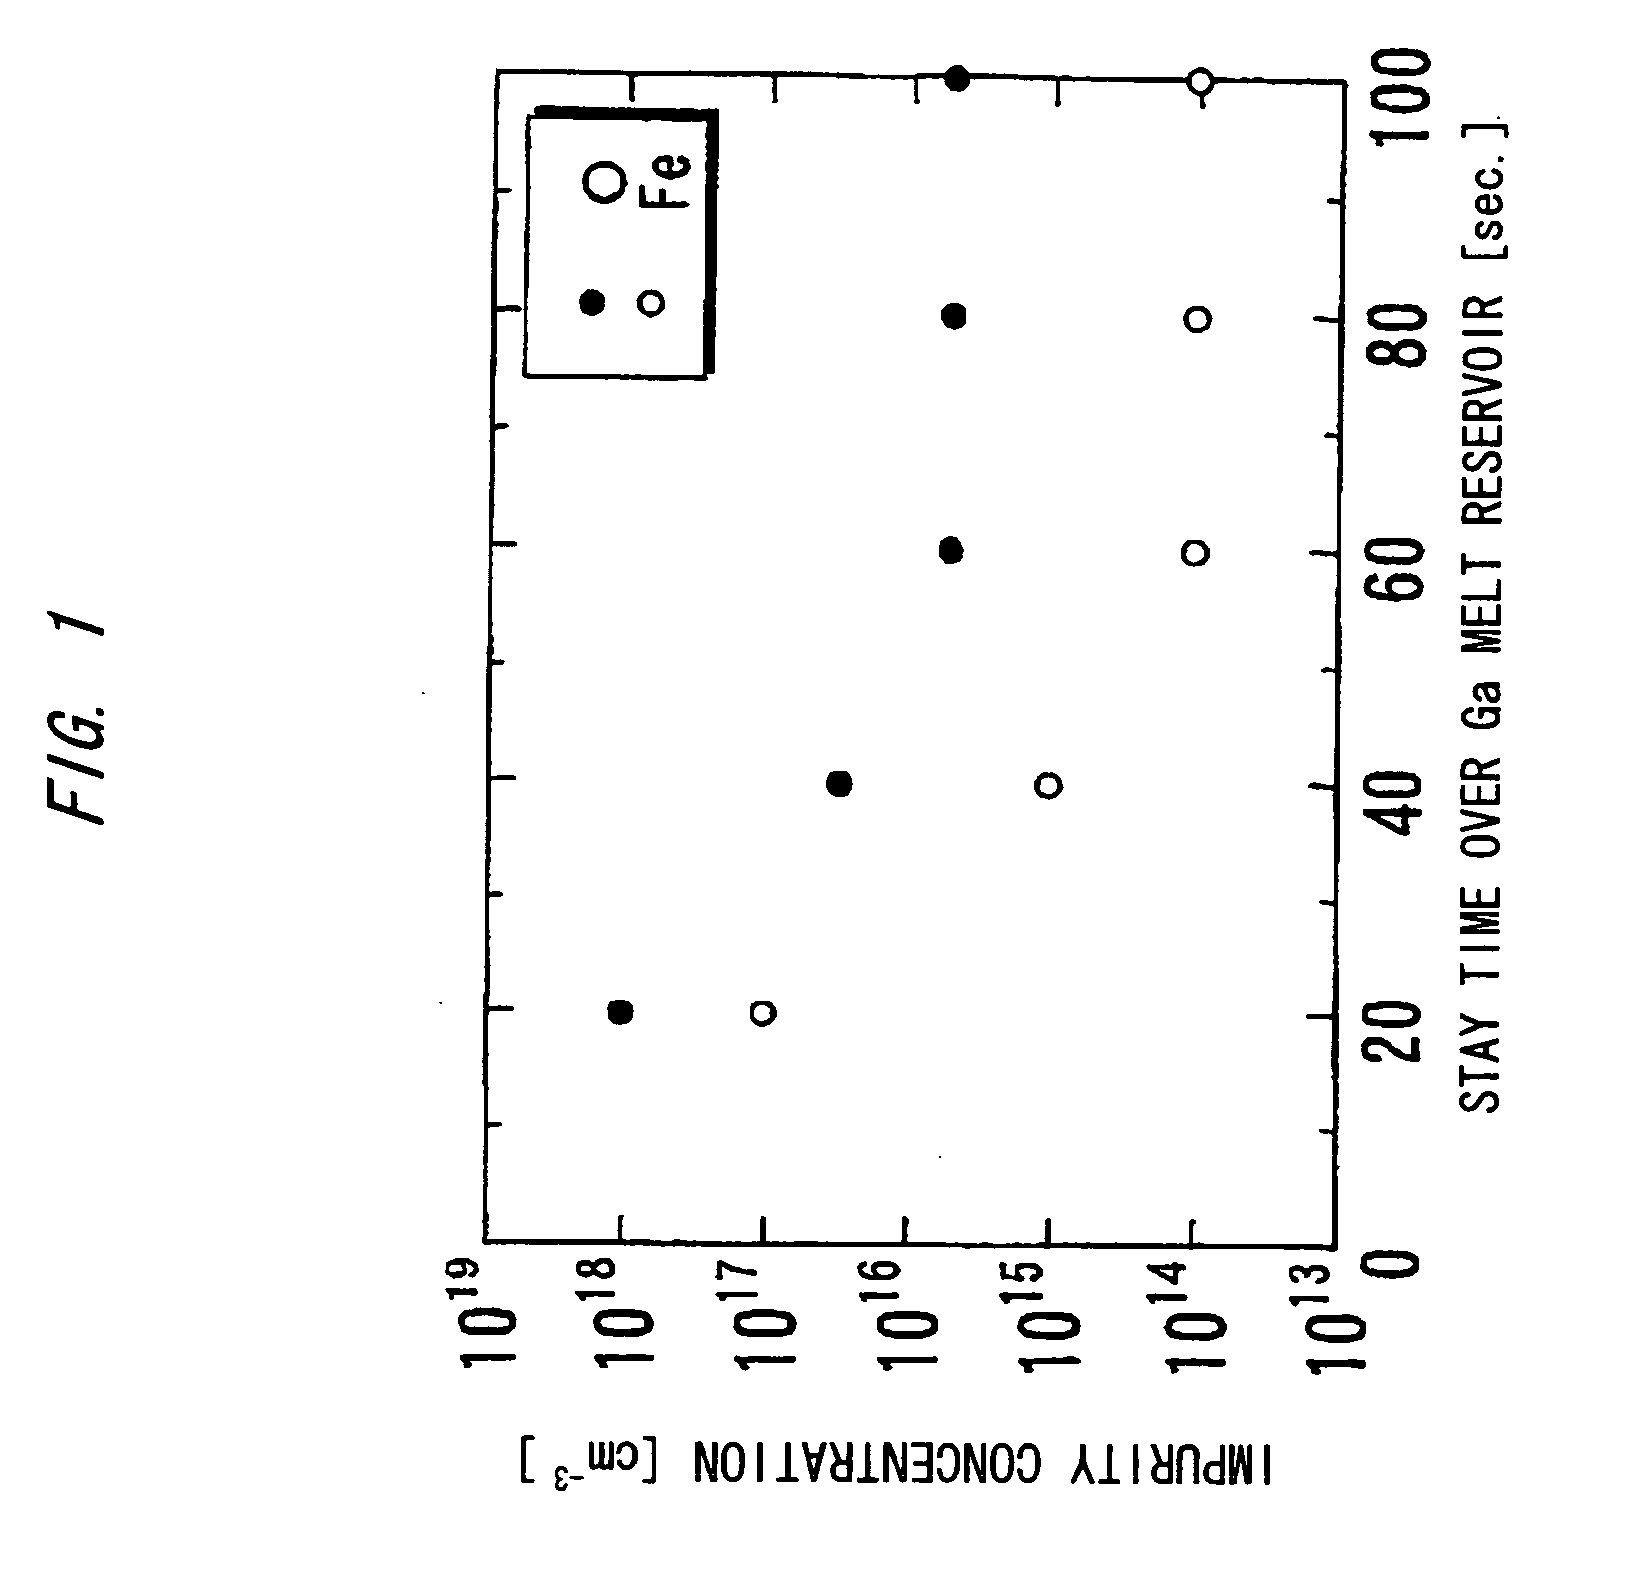 Nitride-based semiconductor substrate and method of making the same